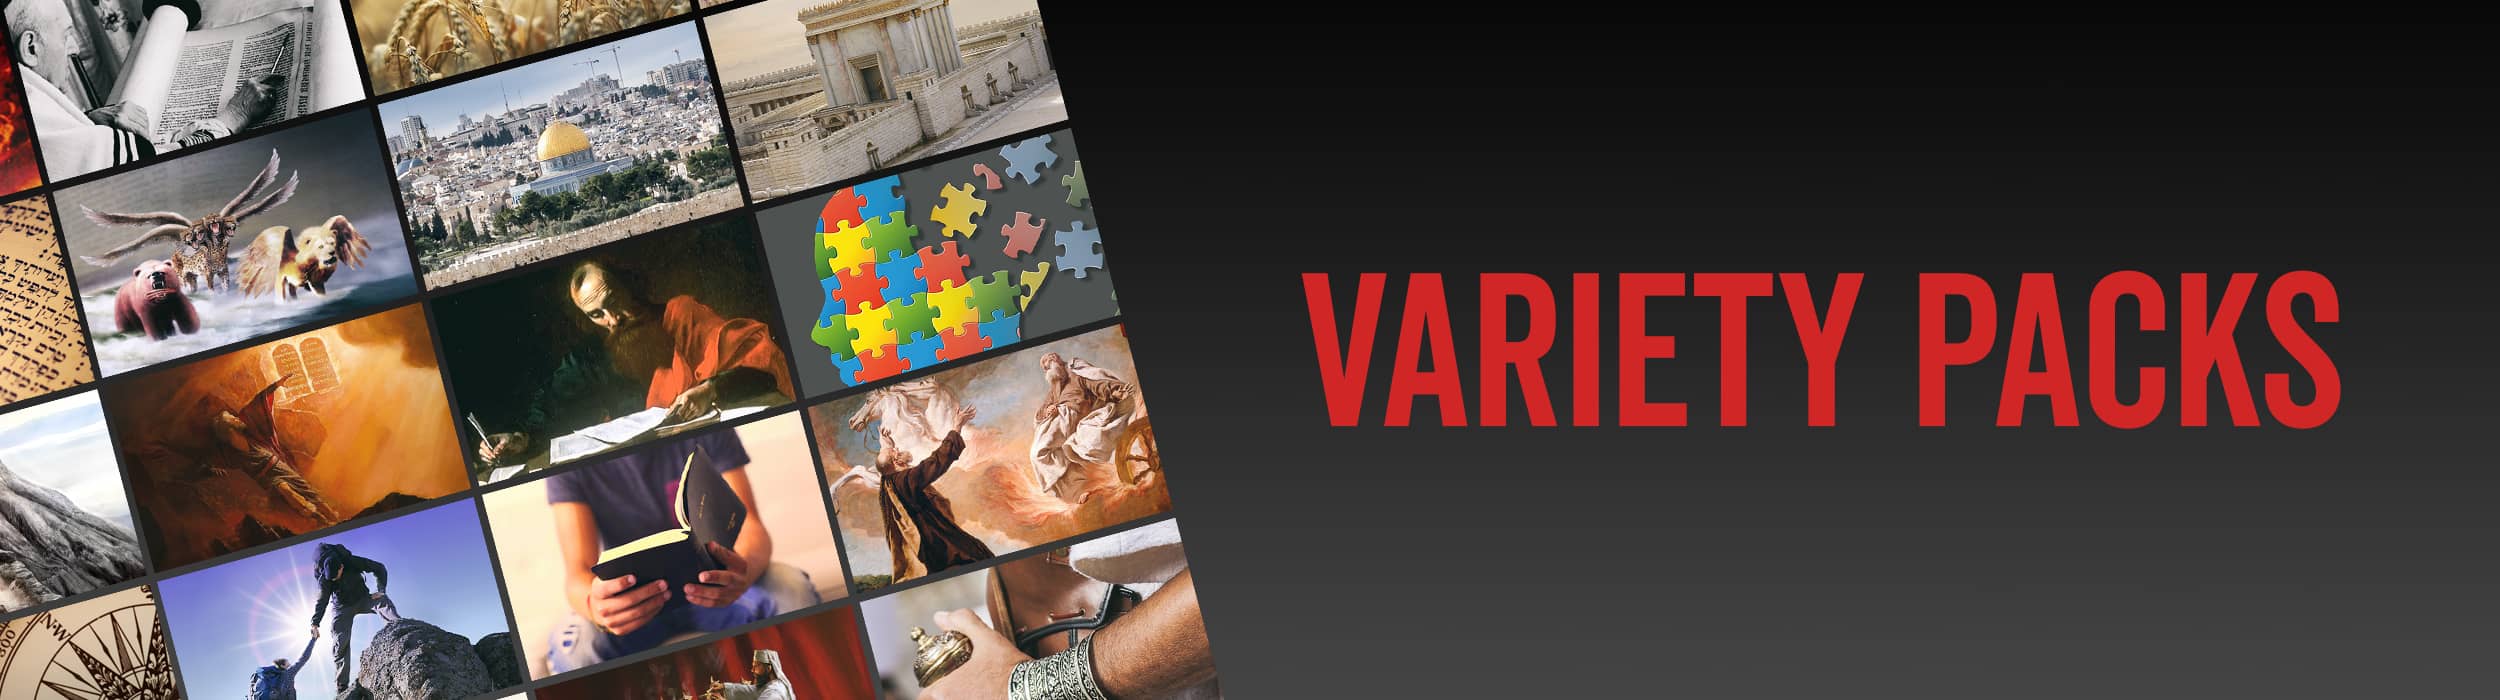 Variety Pack Online Bible Study Courses